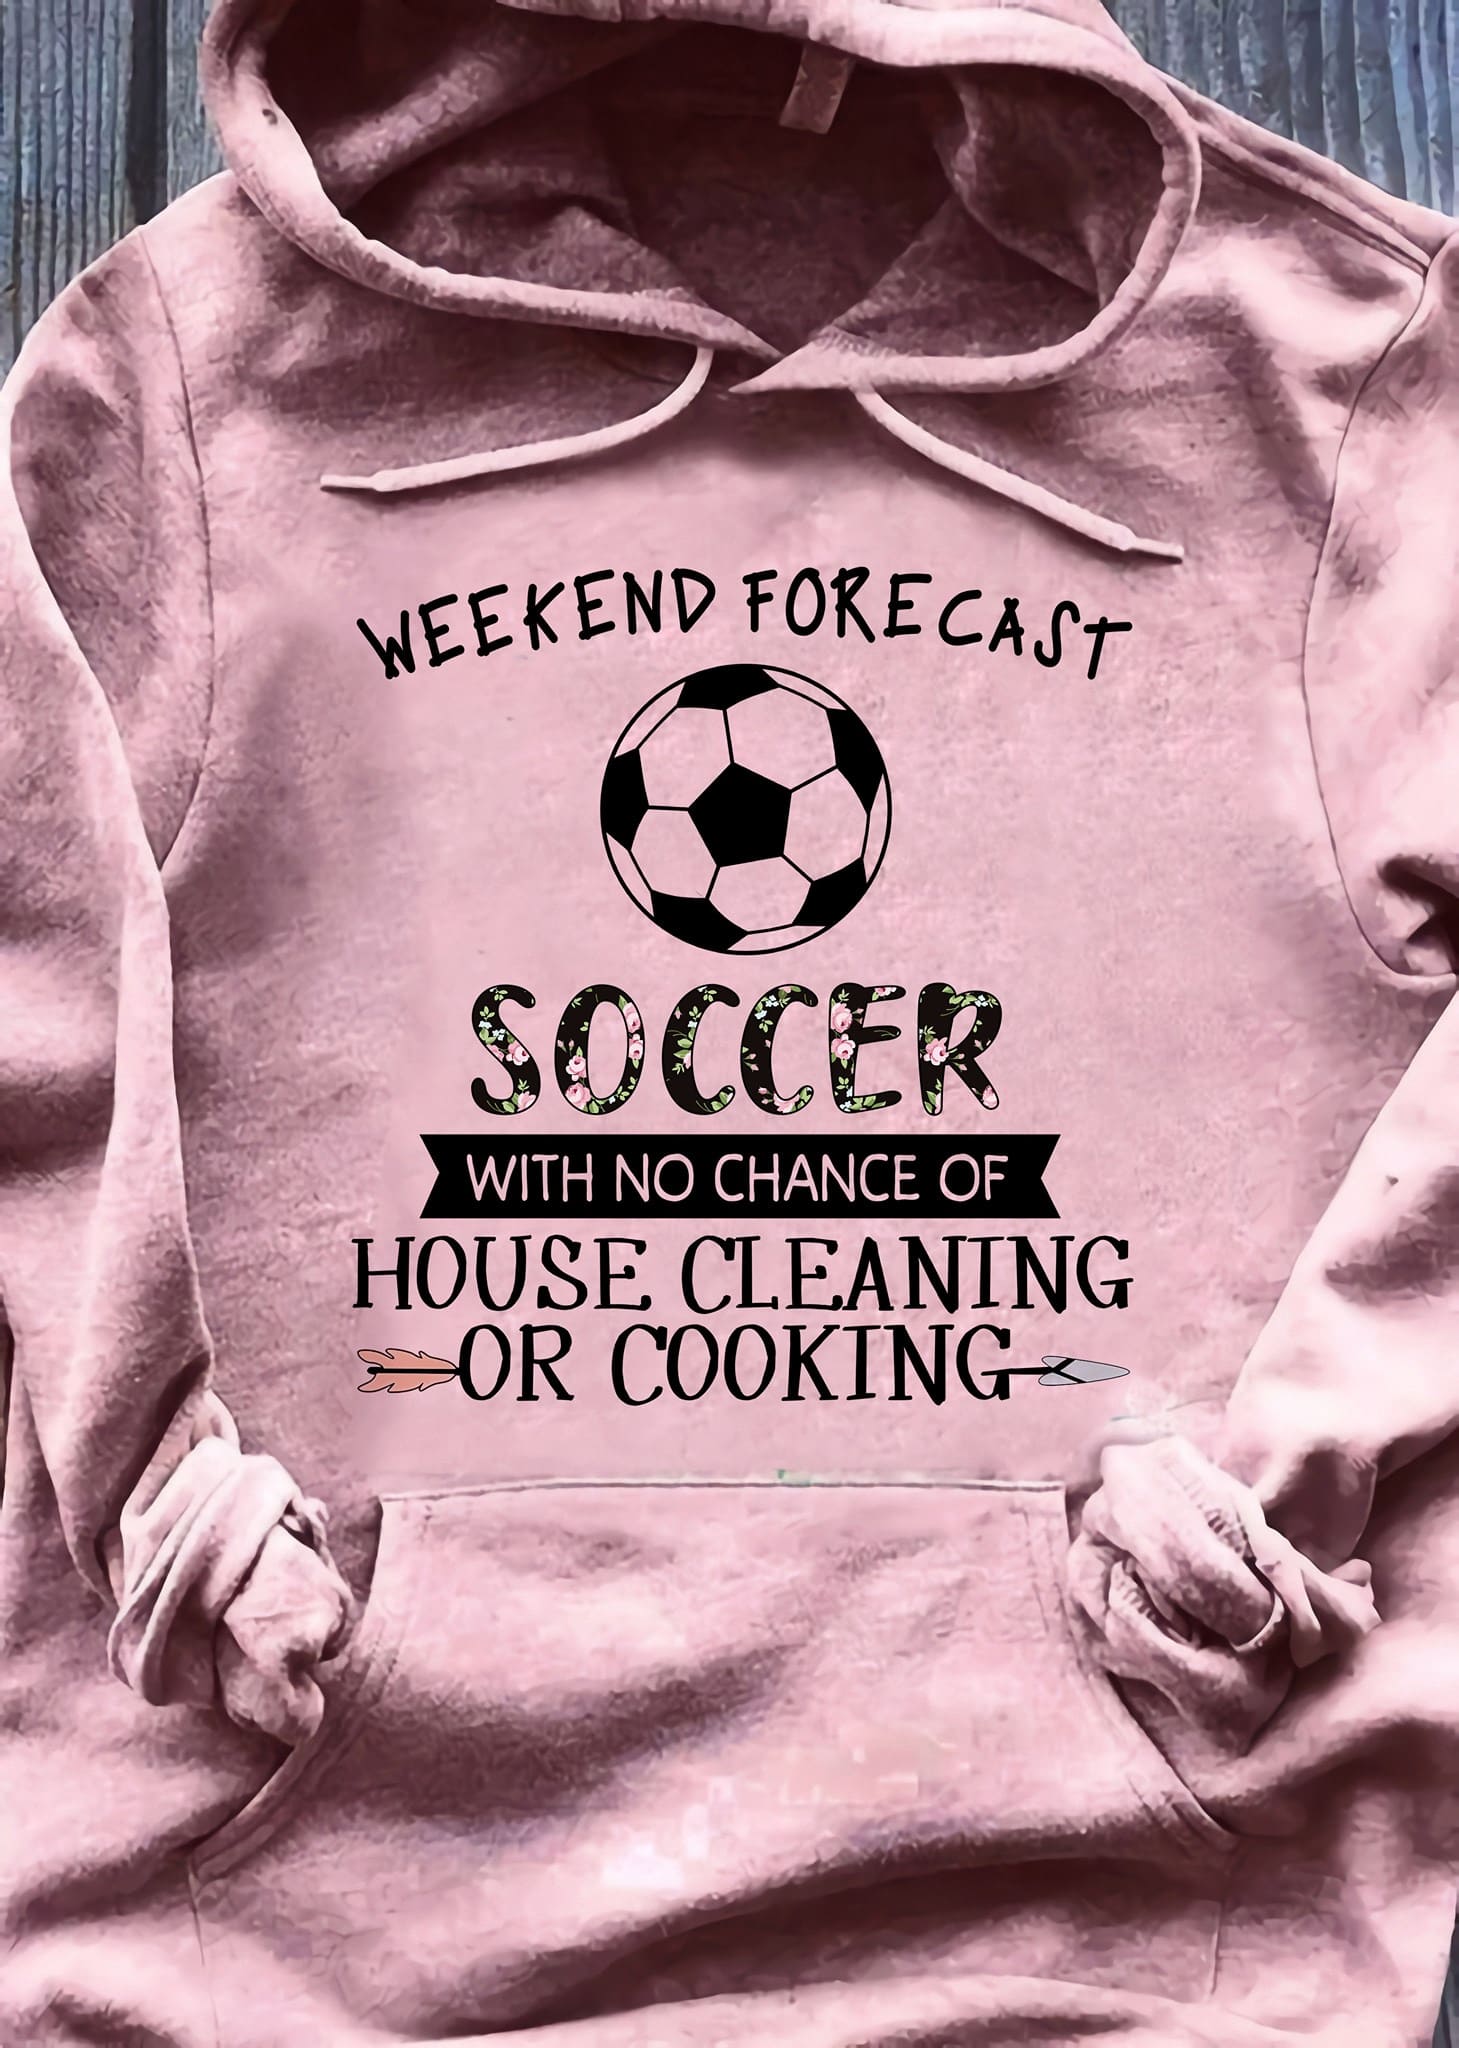 Soccer Player - Weekend forecast soccer with no chance of house cleaning or cooking